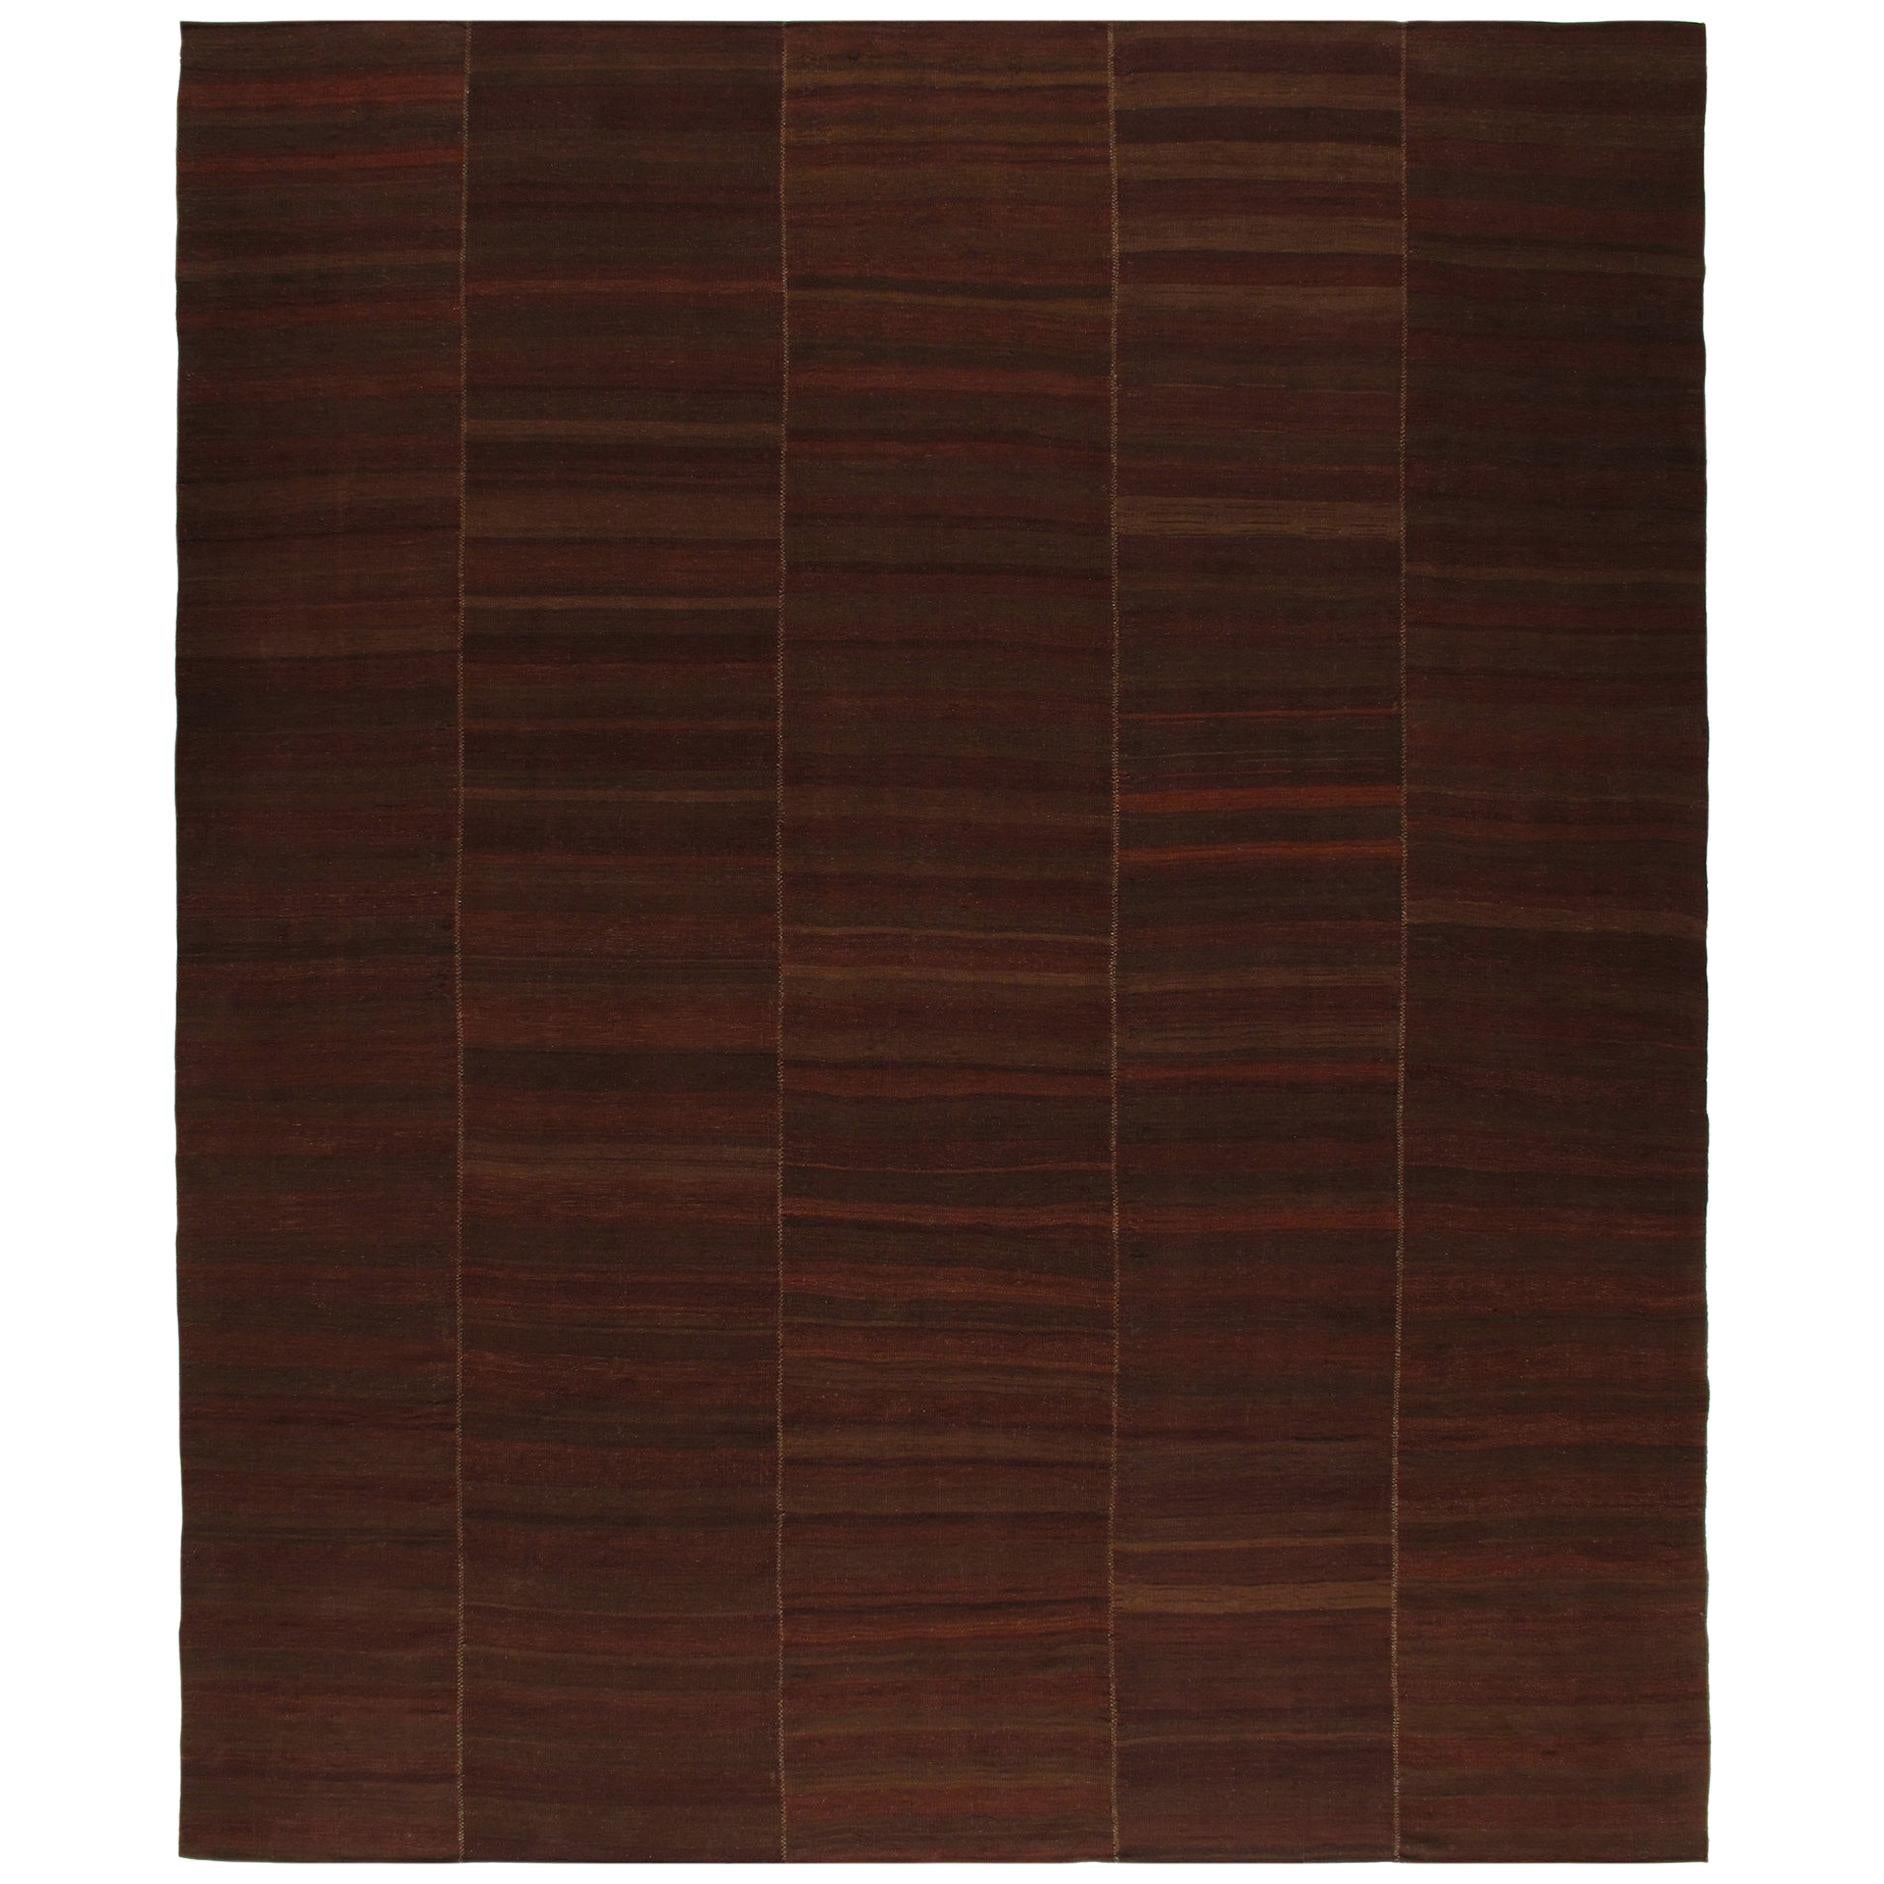 Modern Shiraz Handwoven Flatweave Rug in Brown and Burgundy Color